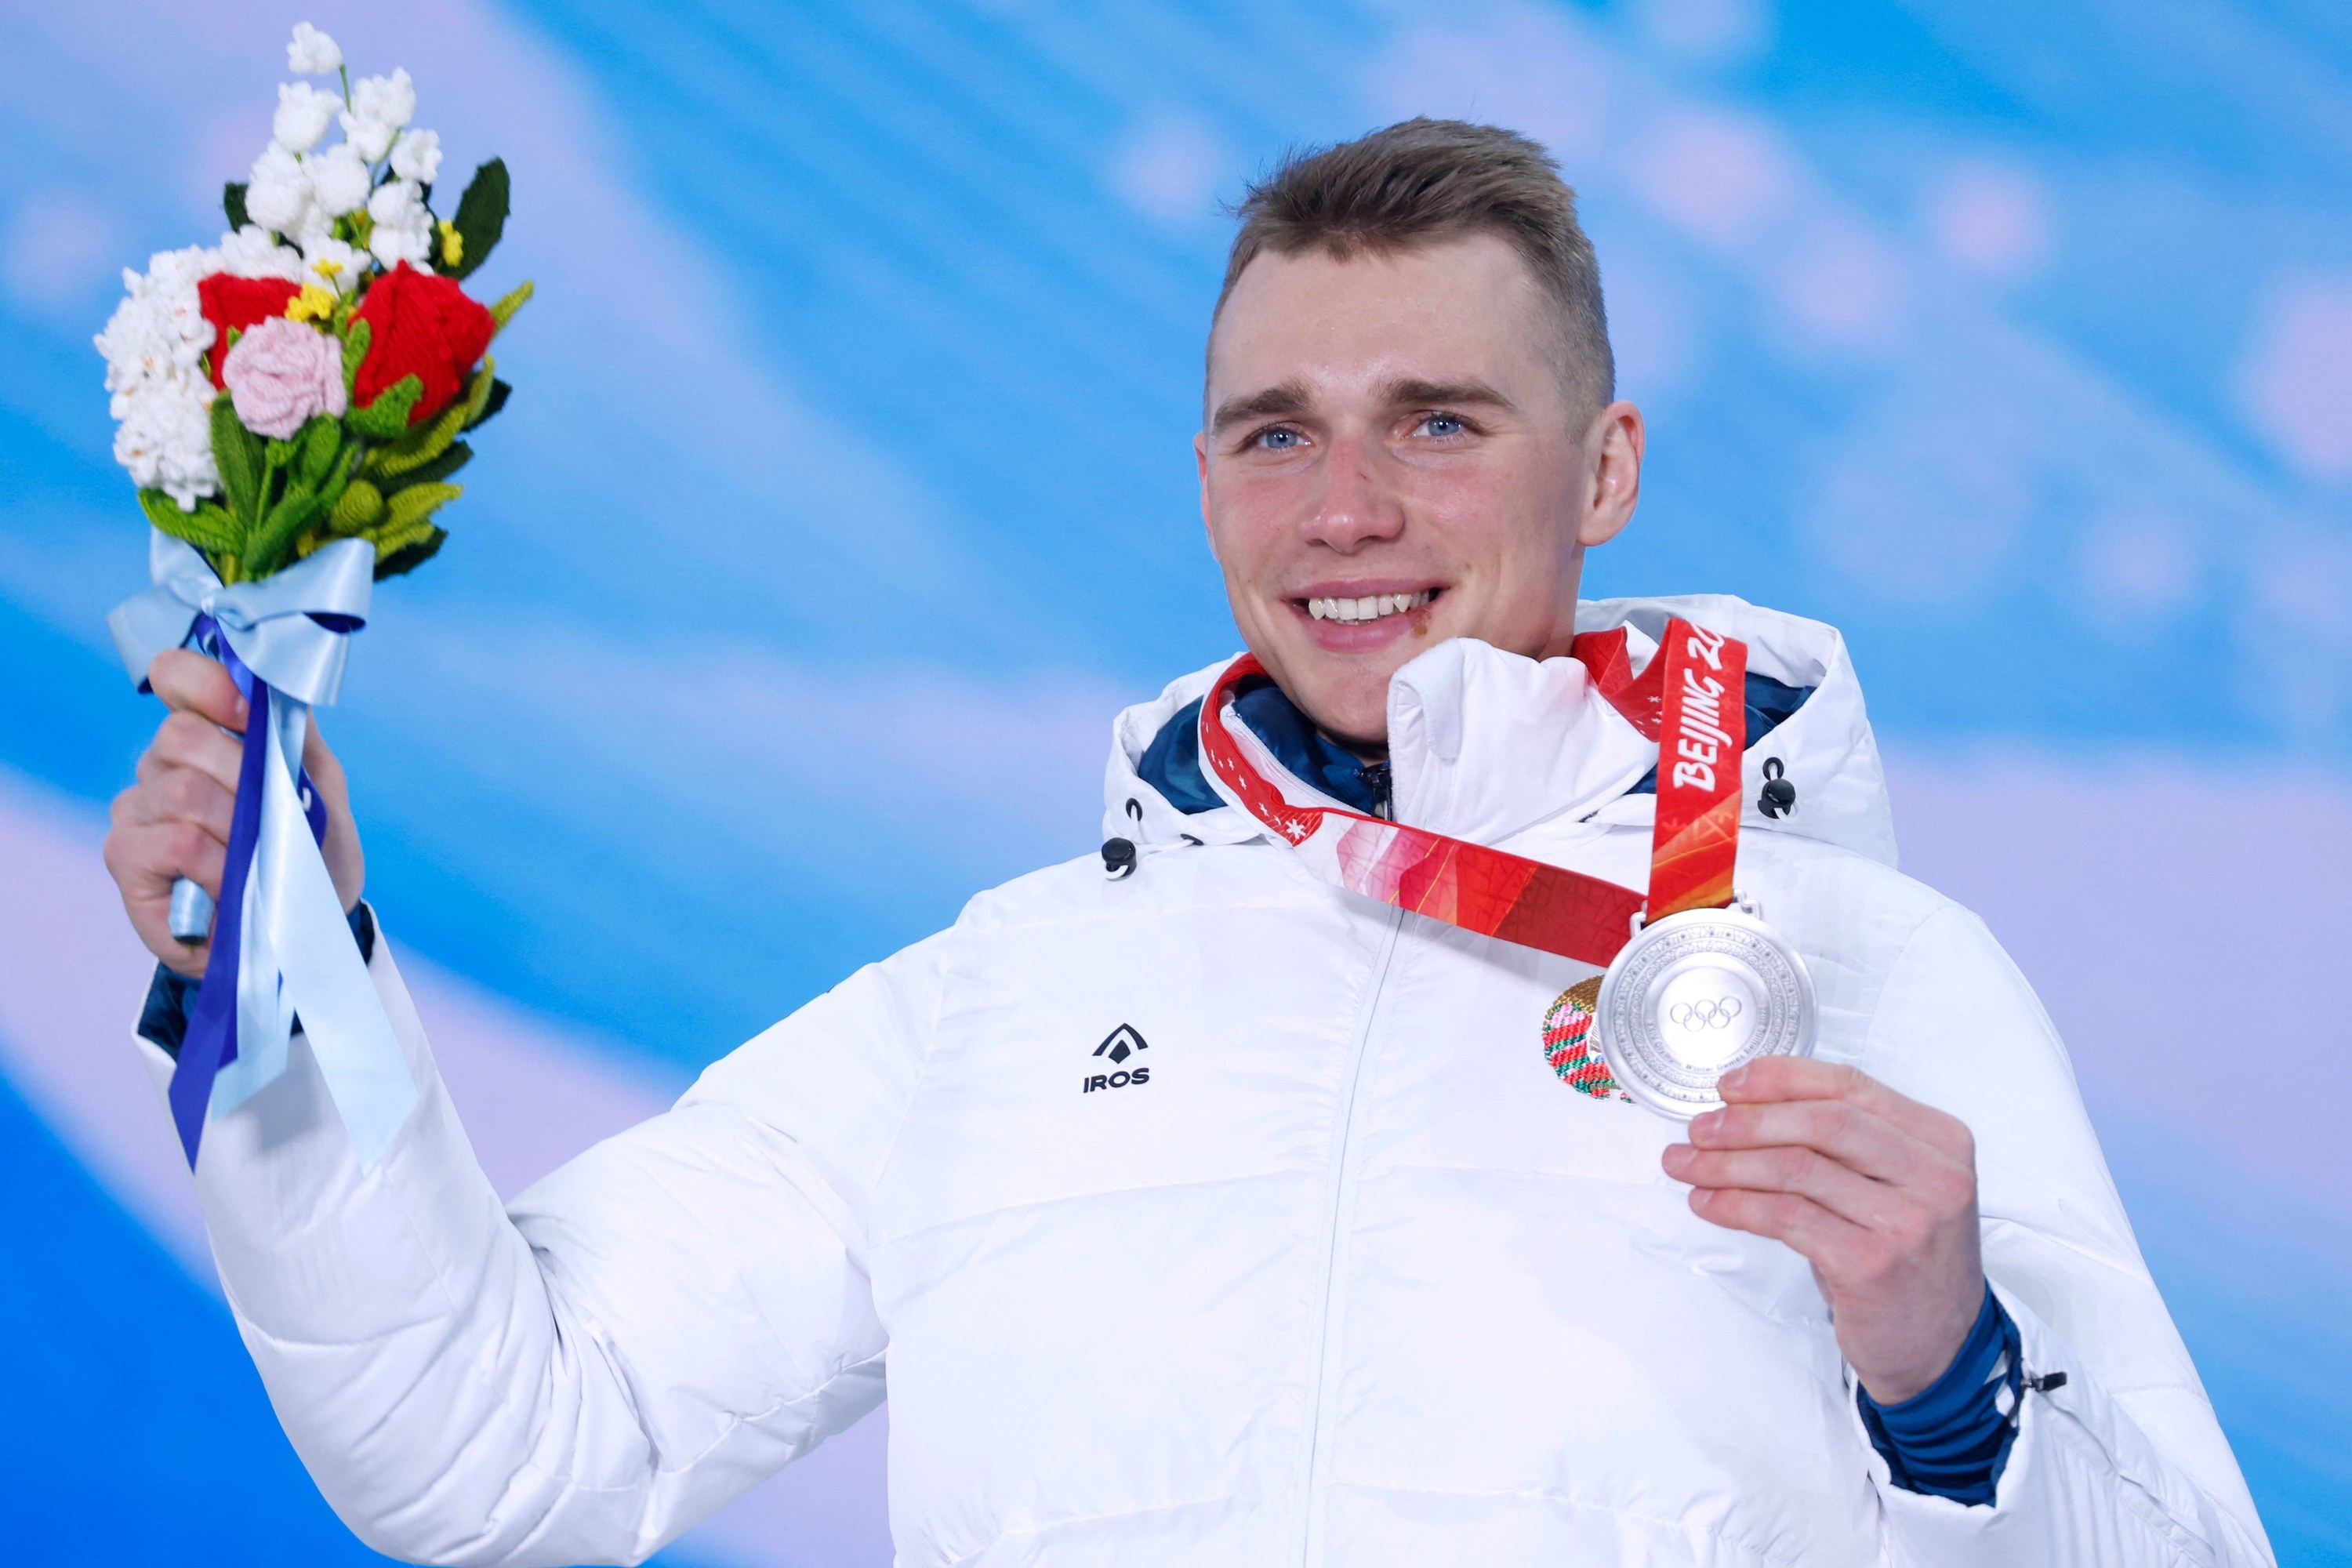 A Bulgarian athlete holding up his silver medal and flower bouquet